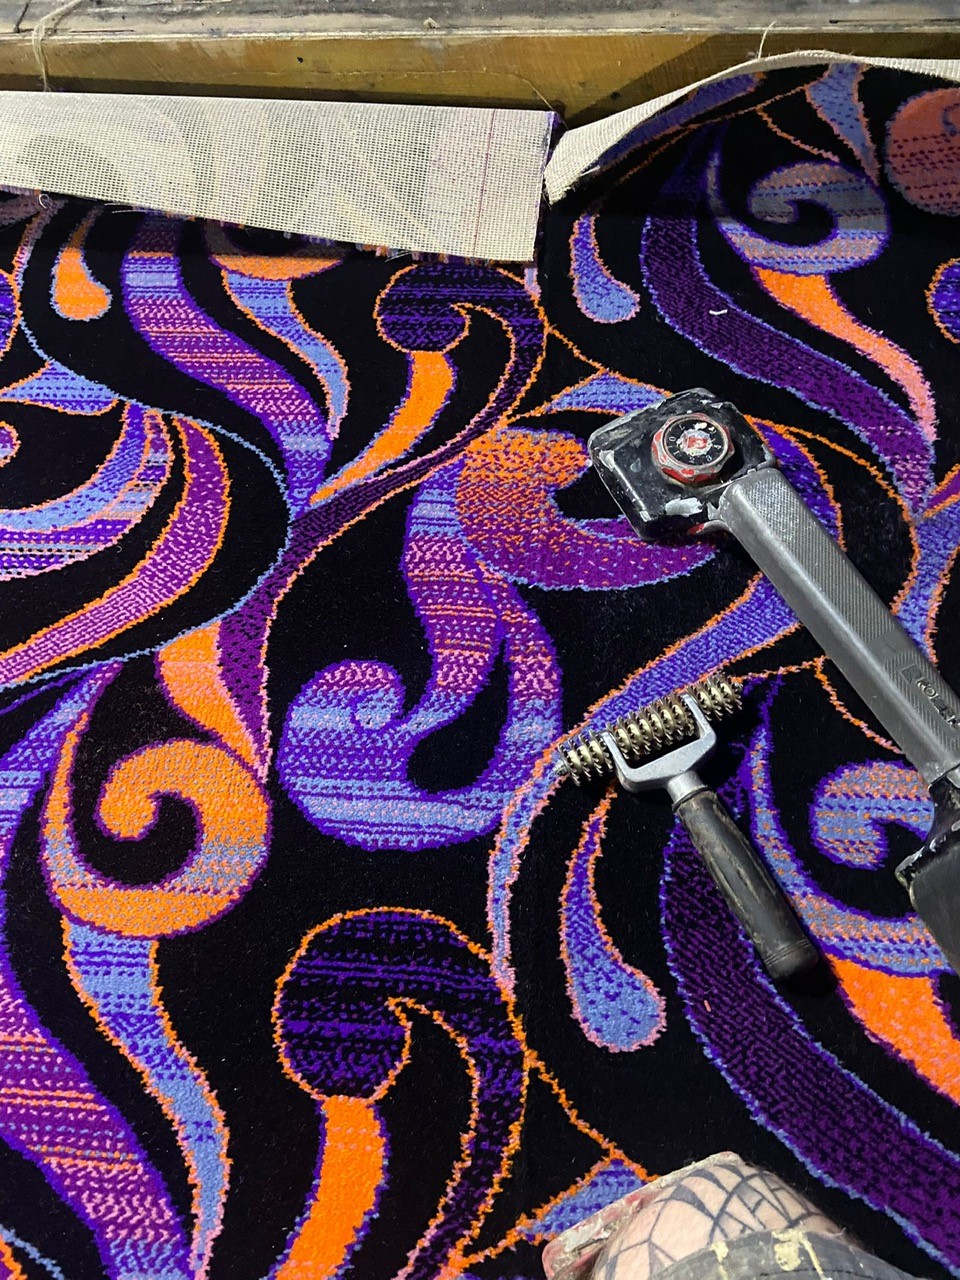 Acapulco Nightclub Halifax close-up shot of bespoke purple and black patterned carpets designed by Wilton Carpets